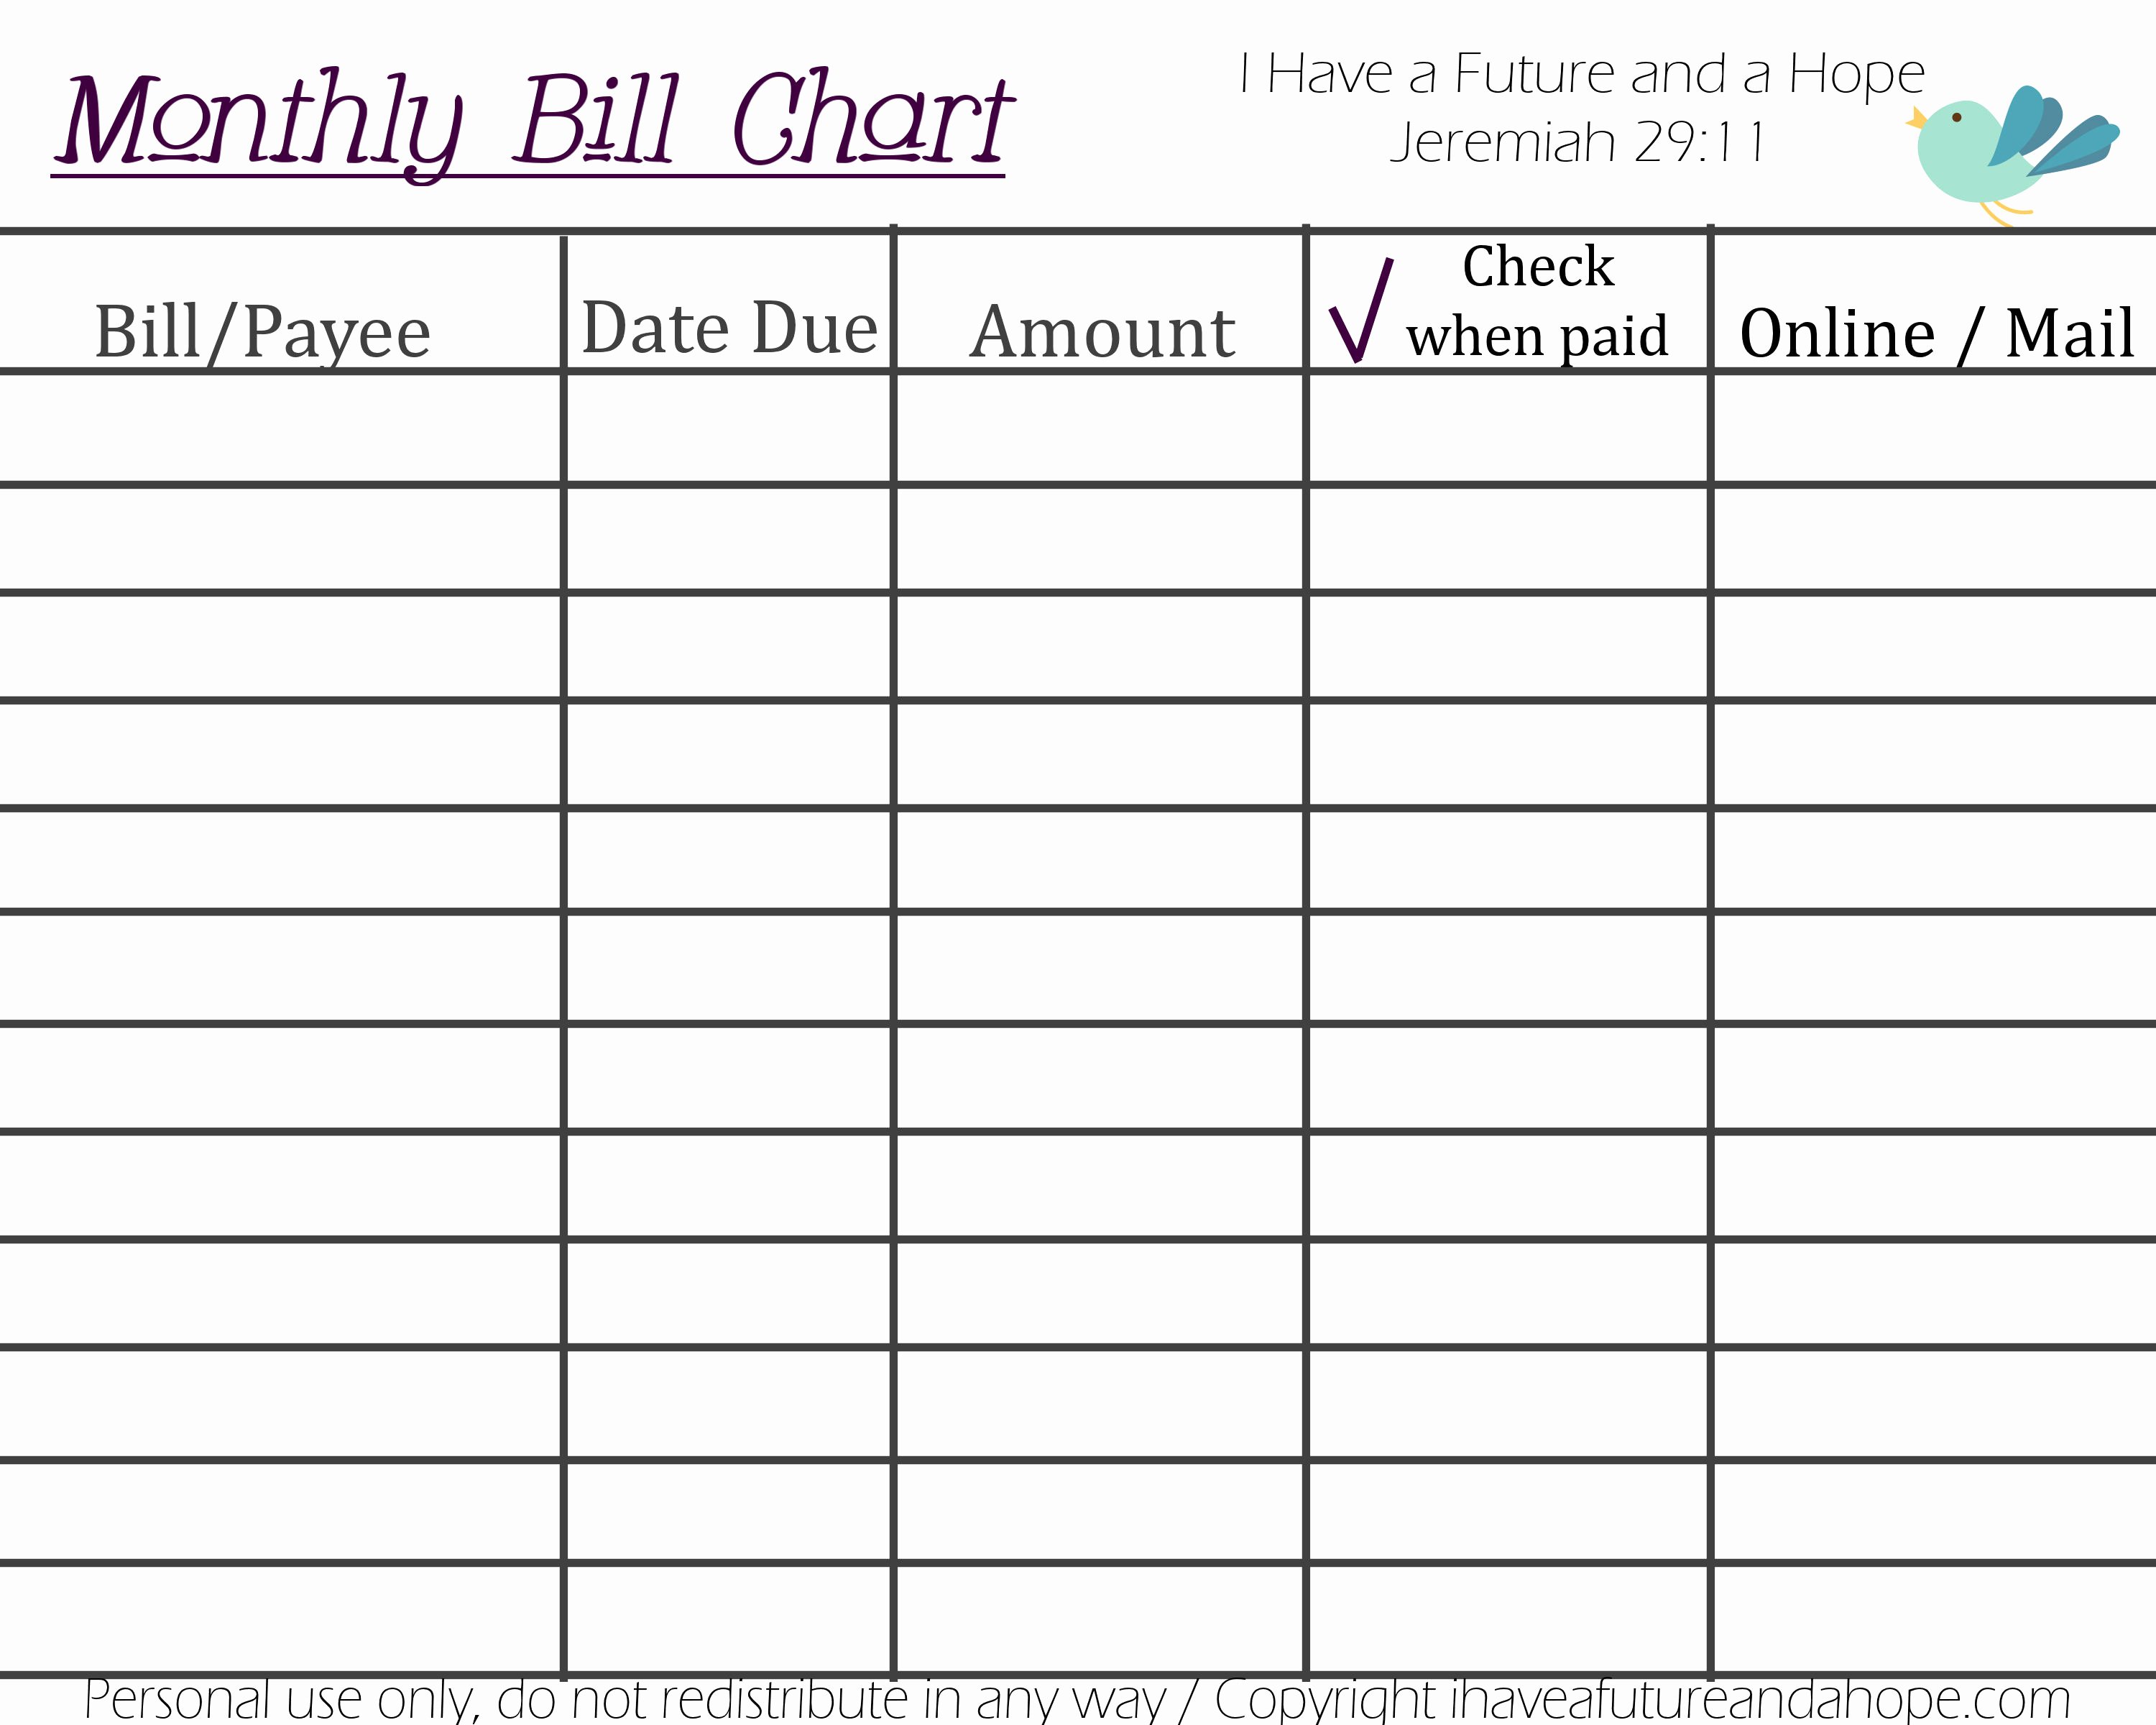 Monthly Bill Calendar Template Beautiful Search Results for “blank Monthly Bill Payments Worksheet